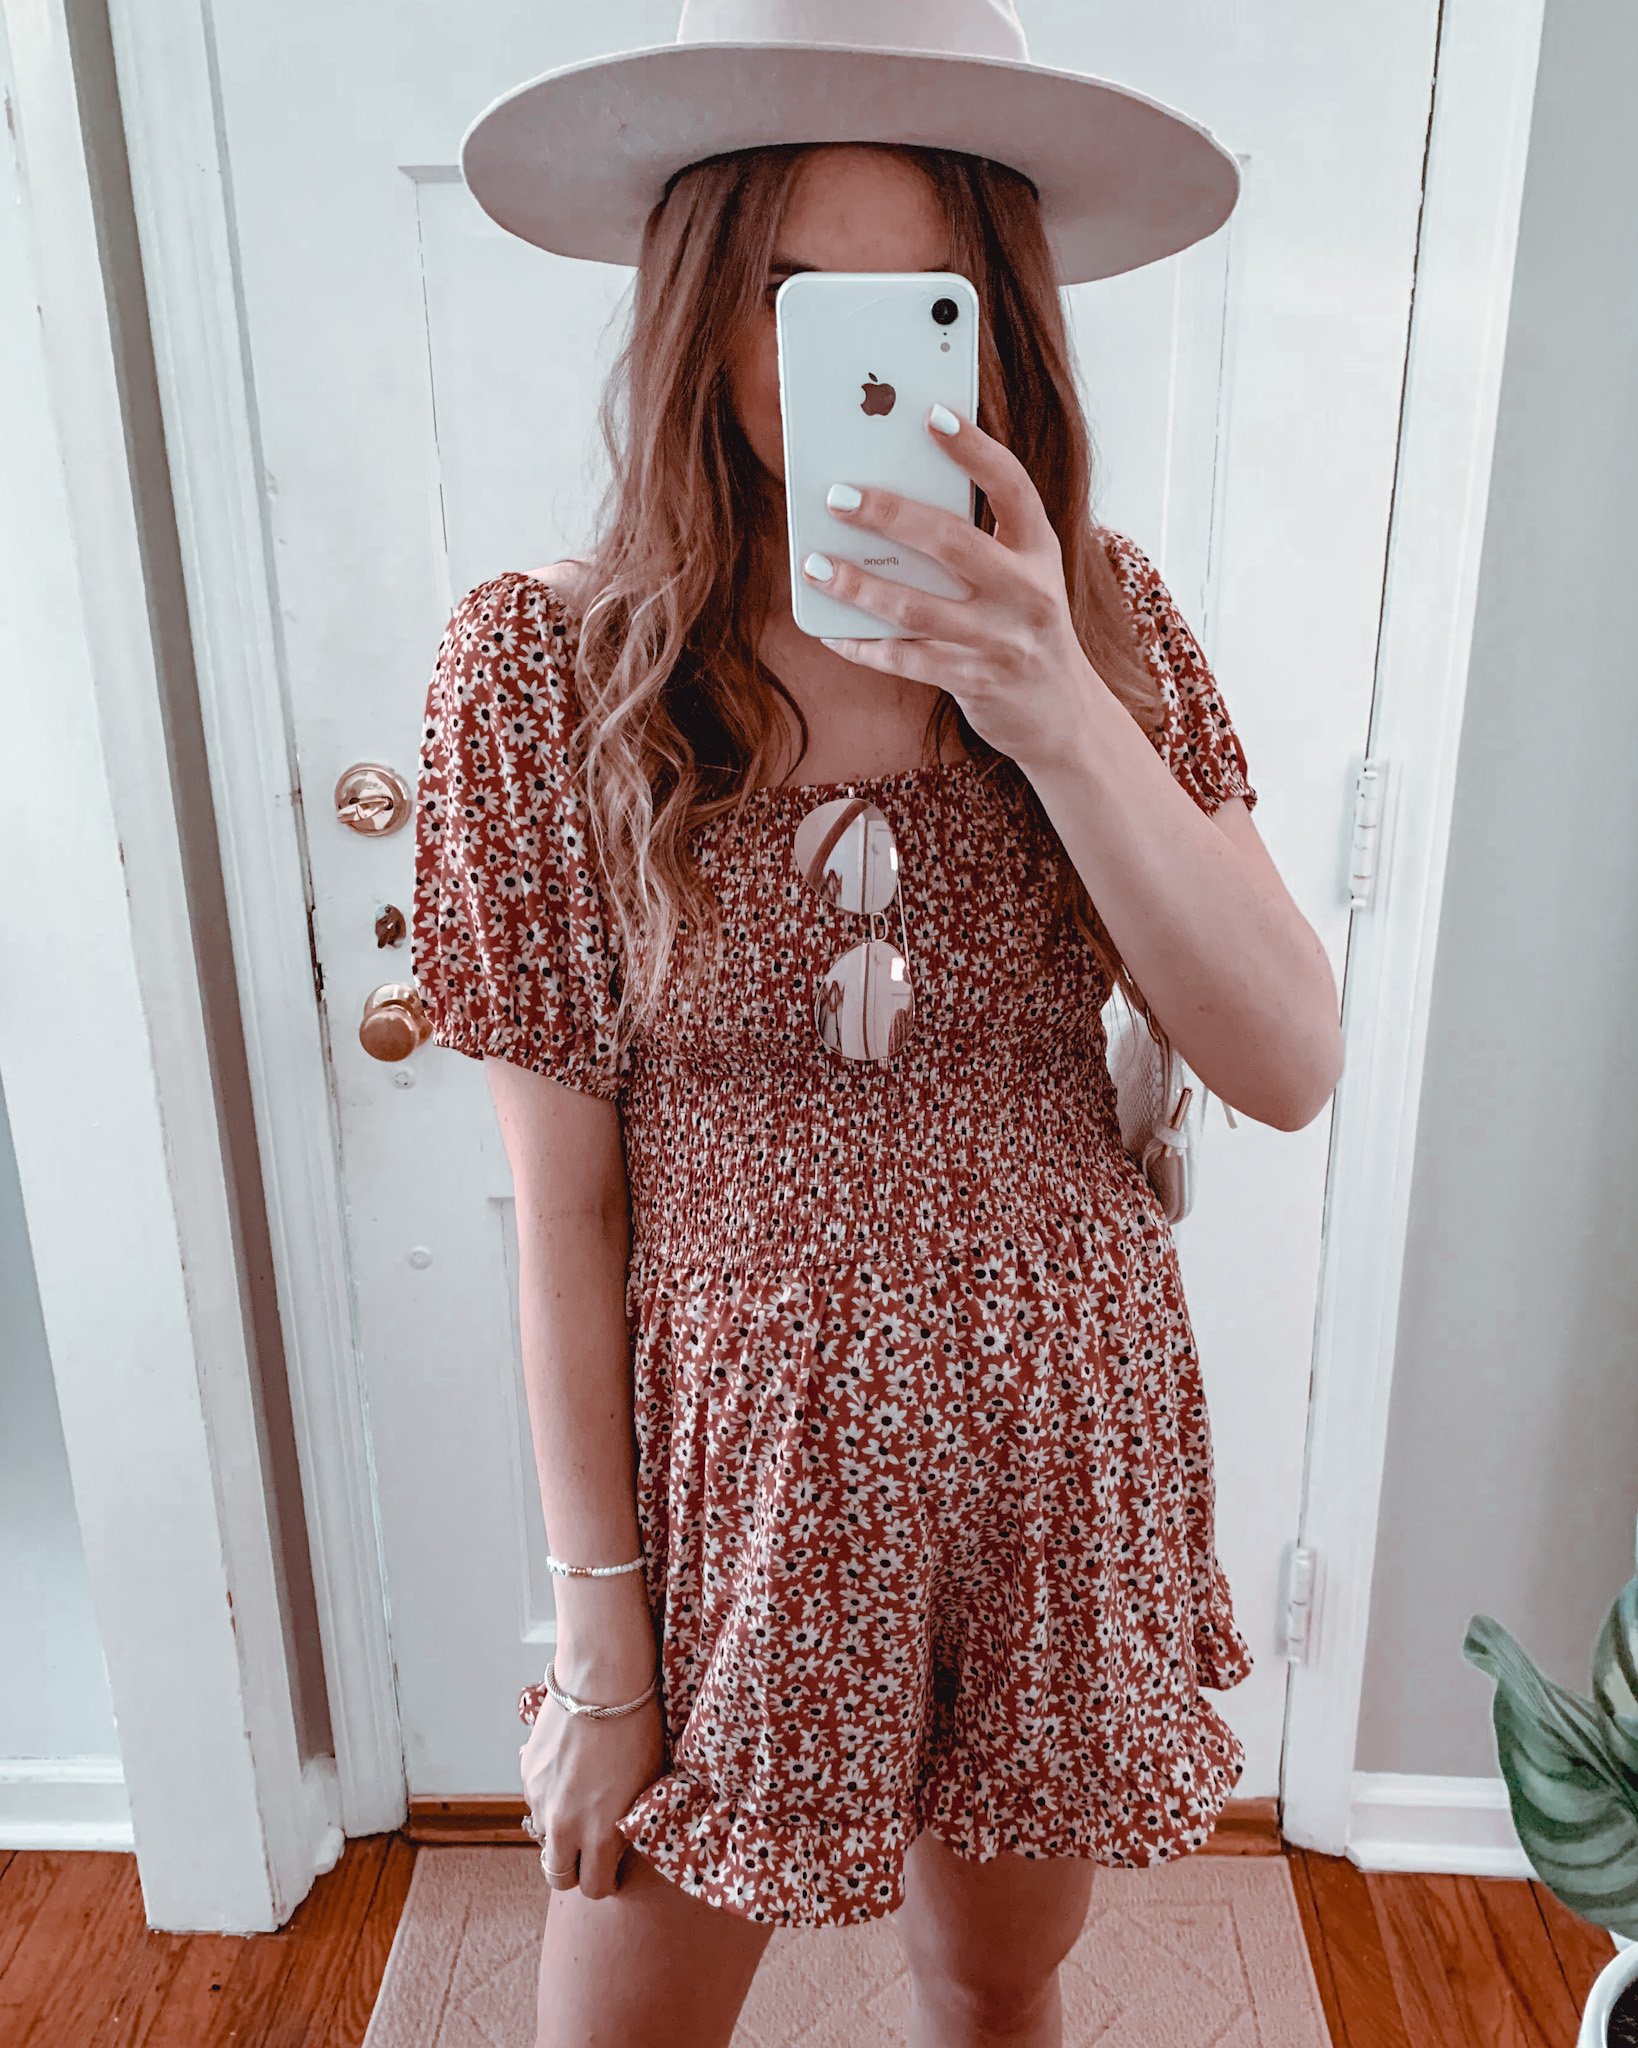 woman taking mirror selfie wearing a beige wide brim fedora hat, red floral romper and pink tinted sunglasses